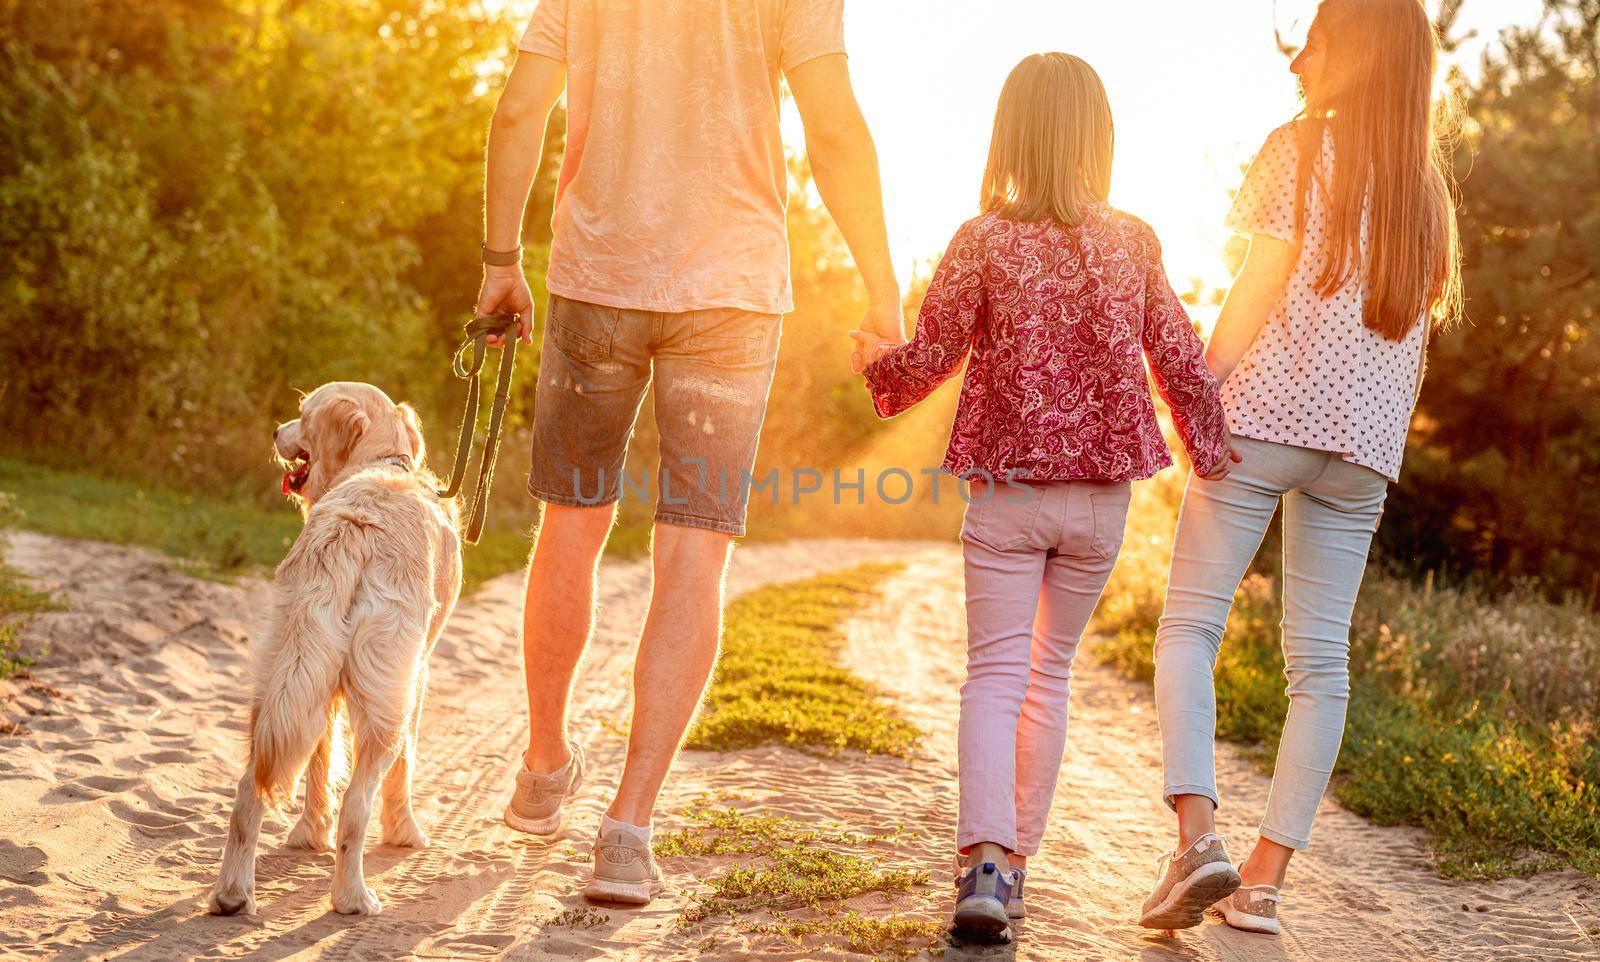 Rear view of daughters with father and dog walking holding hands in nature at sunset